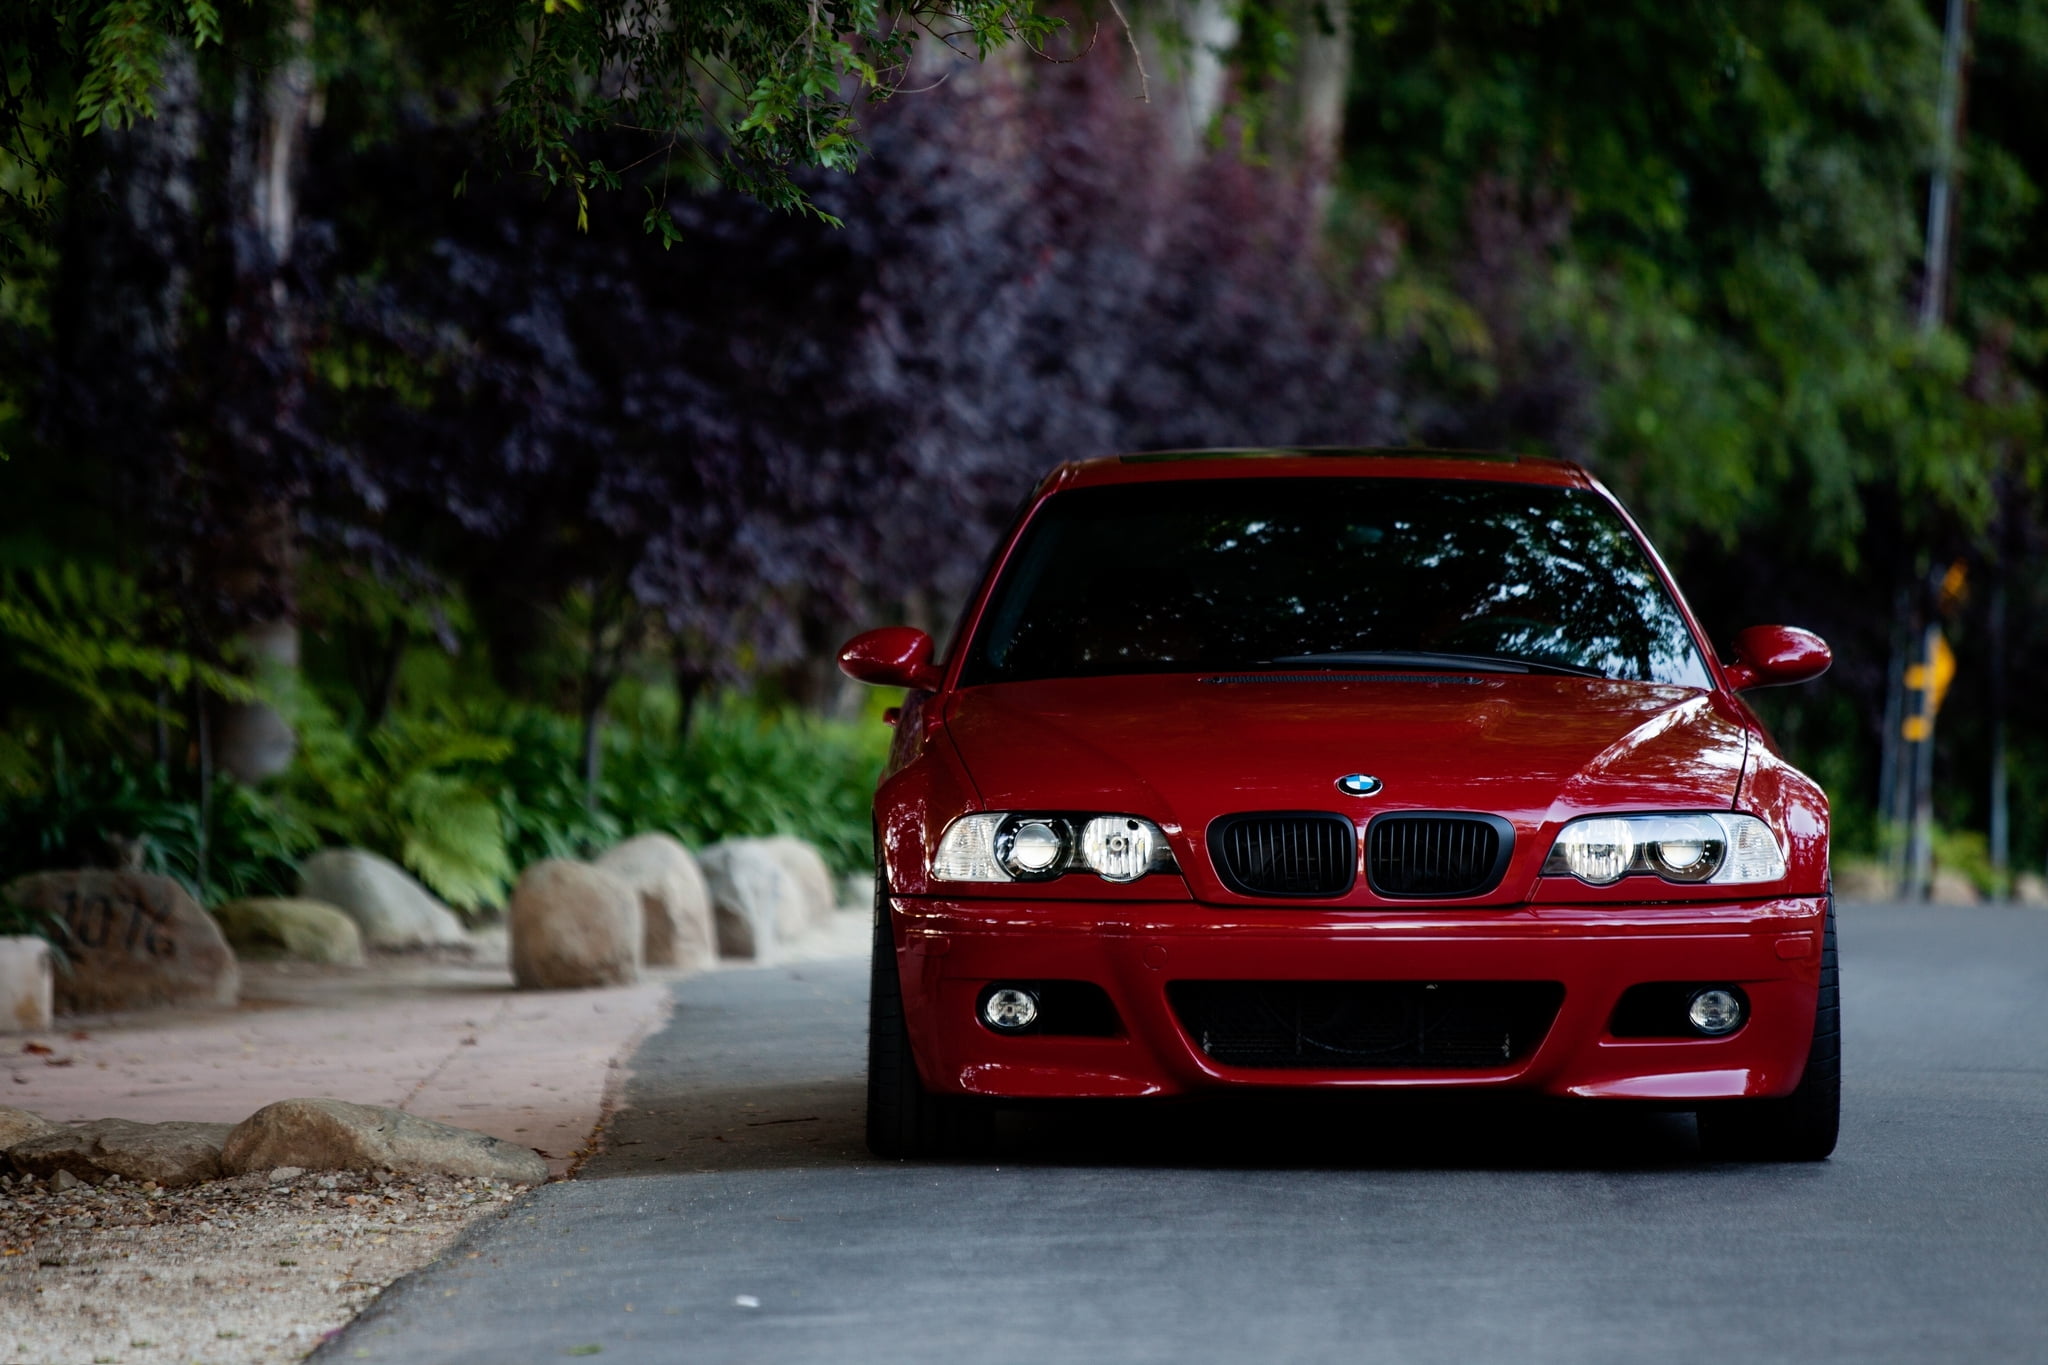 red BMW E46, road, stones, the front, car, land Vehicle, speed